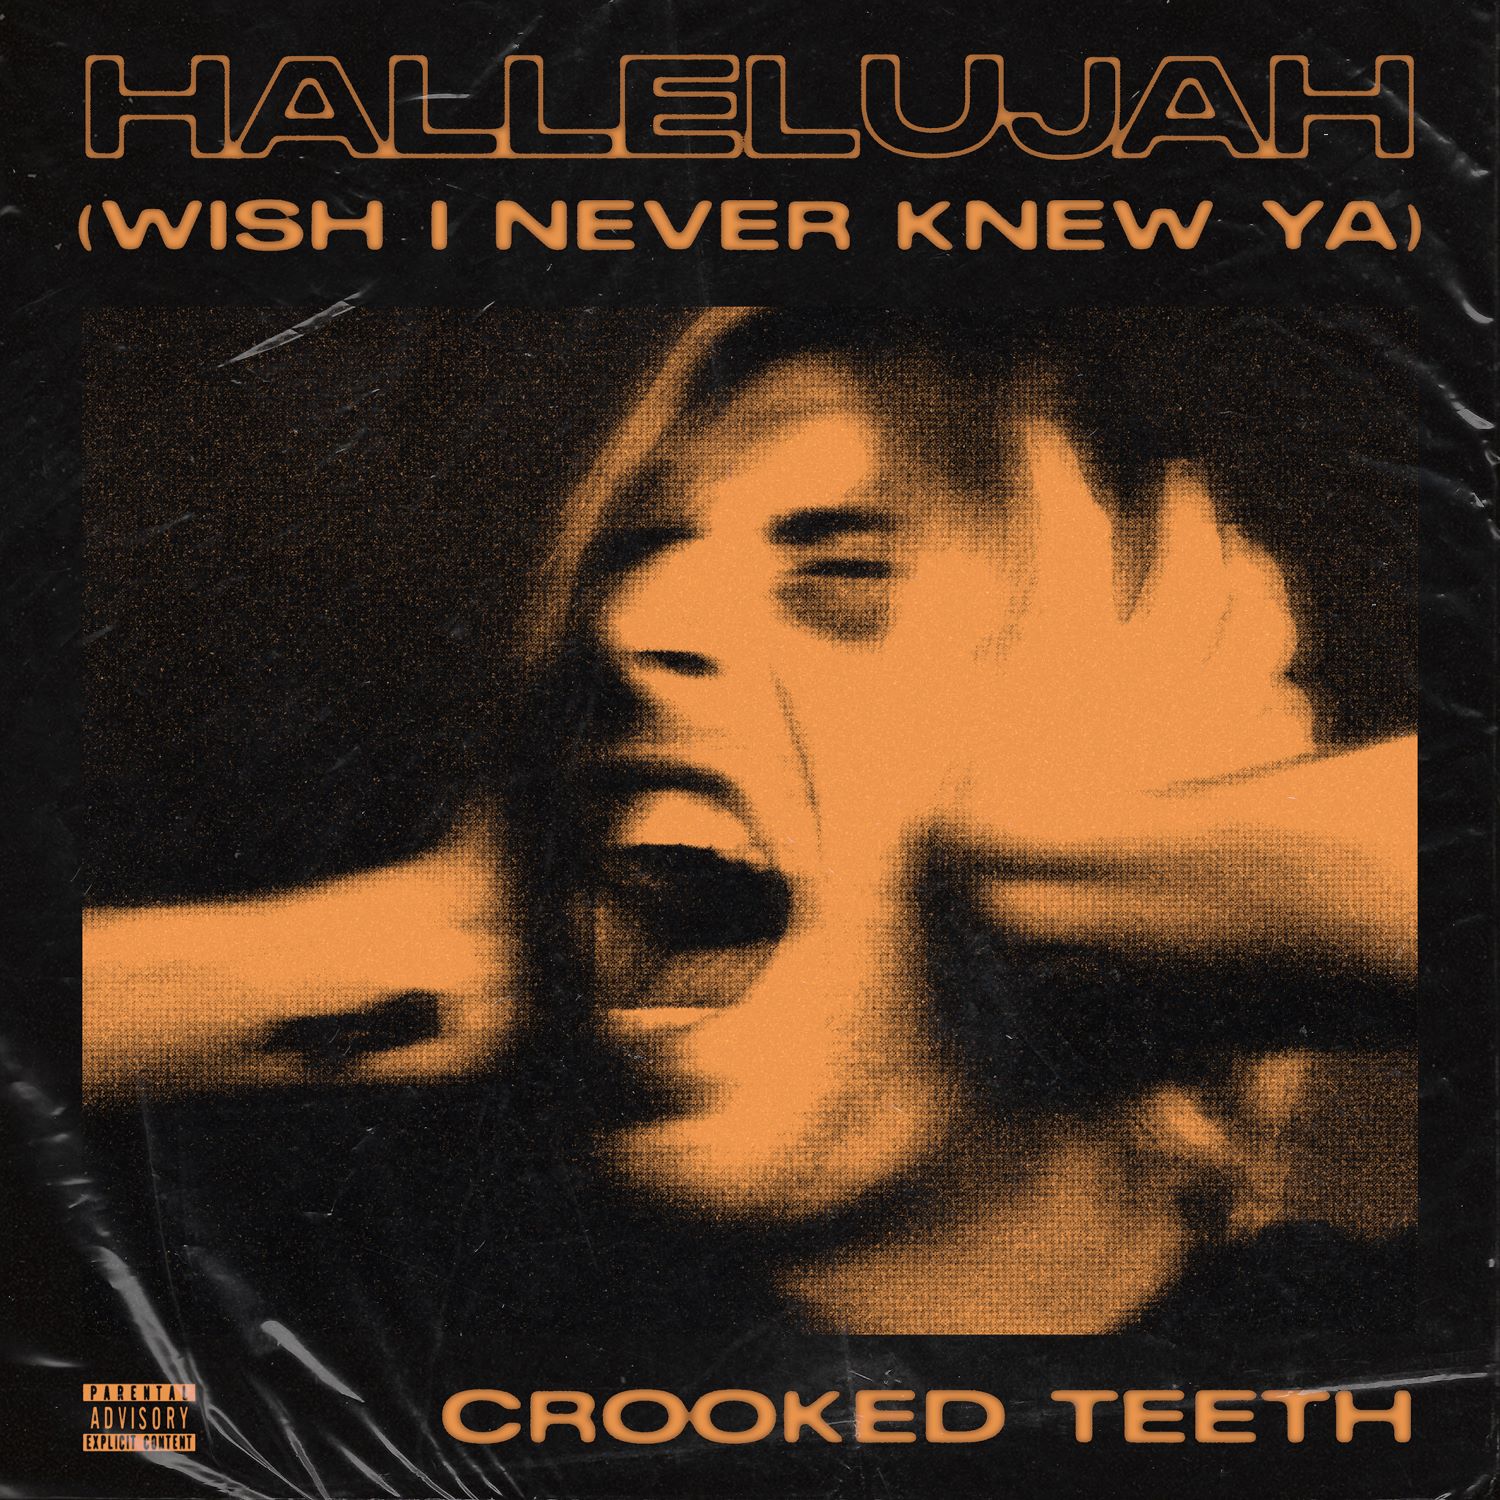 Crooked Teeth - "Hallelujah (Wish I Never Knew Ya)" for Alt & Indie New Music Friday